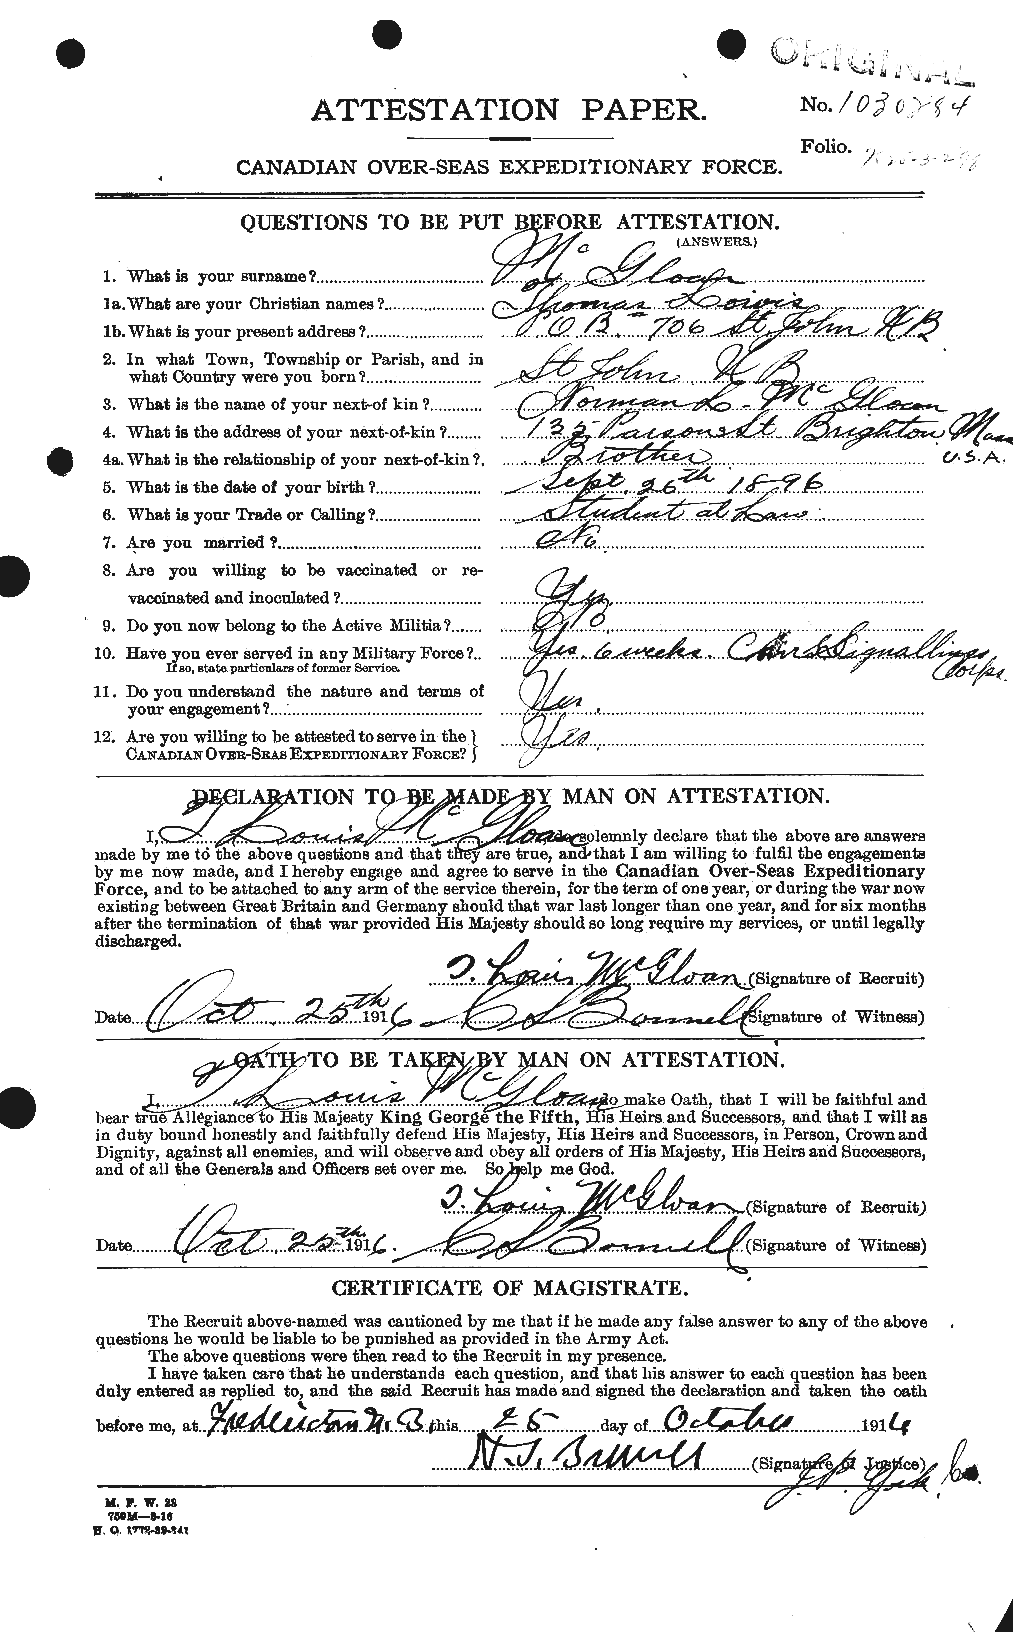 Personnel Records of the First World War - CEF 528447a